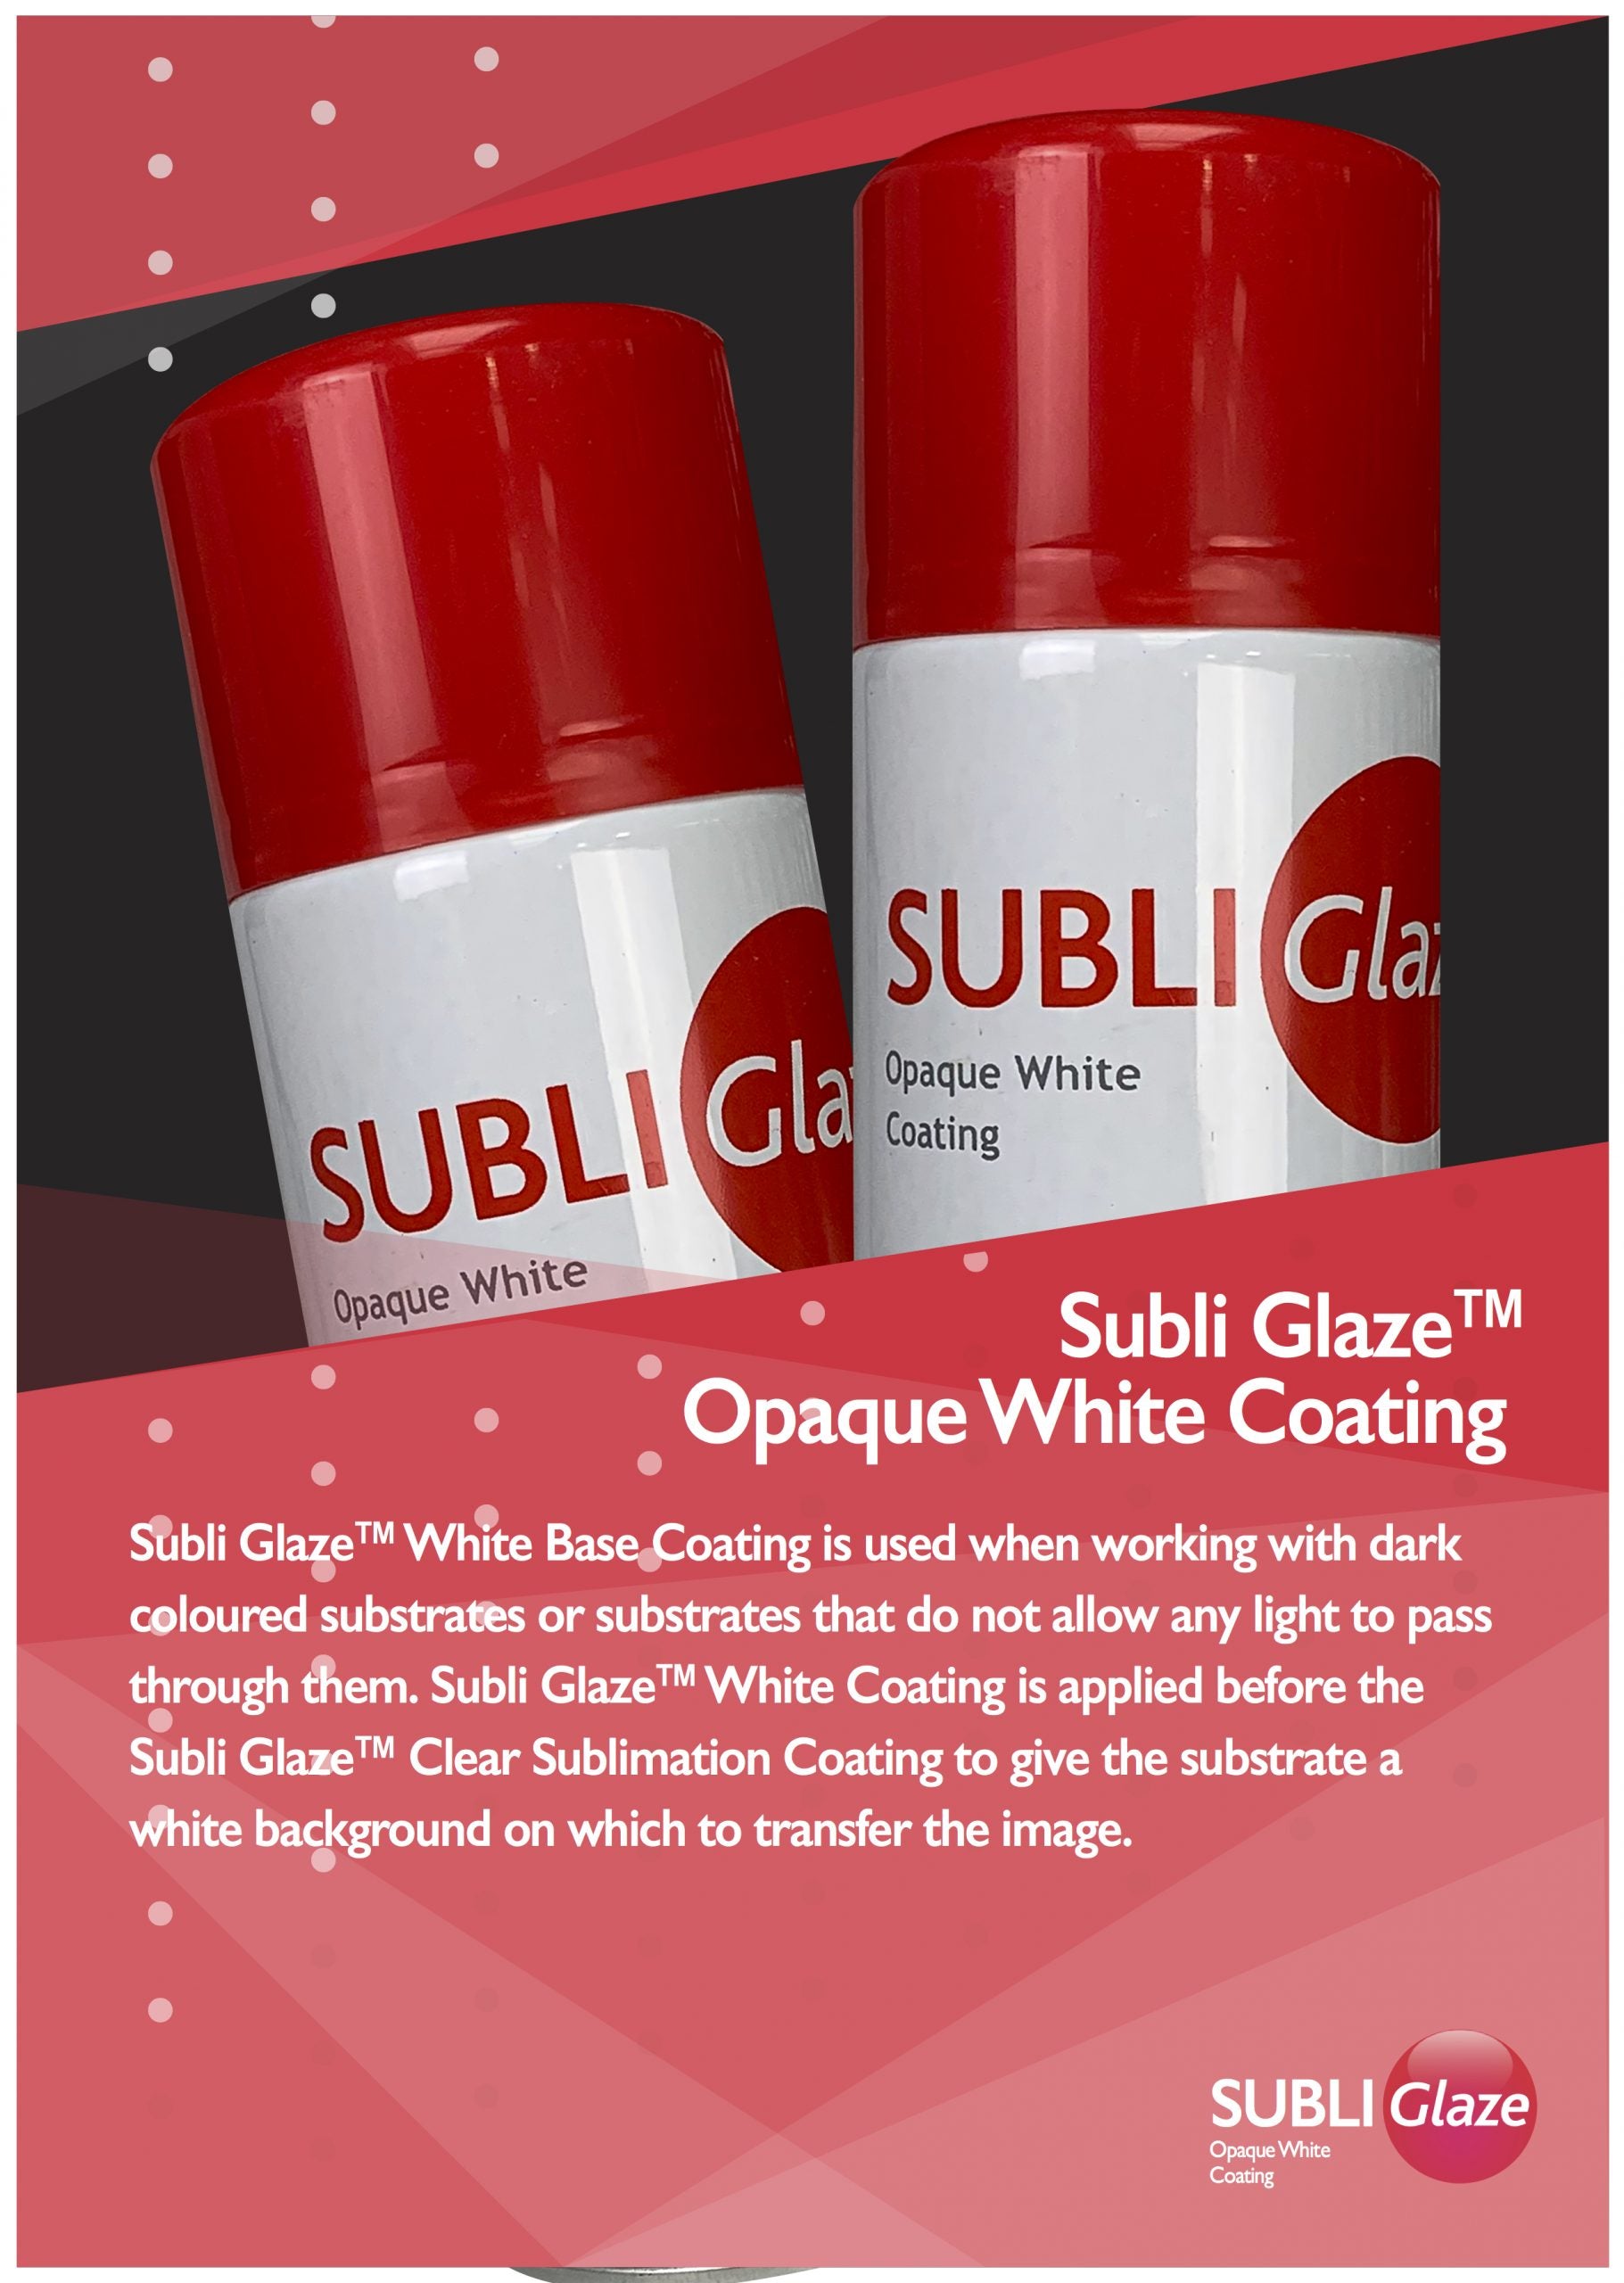 SubliGlaze Instructions on Metal and Glass, Sublimation coatings